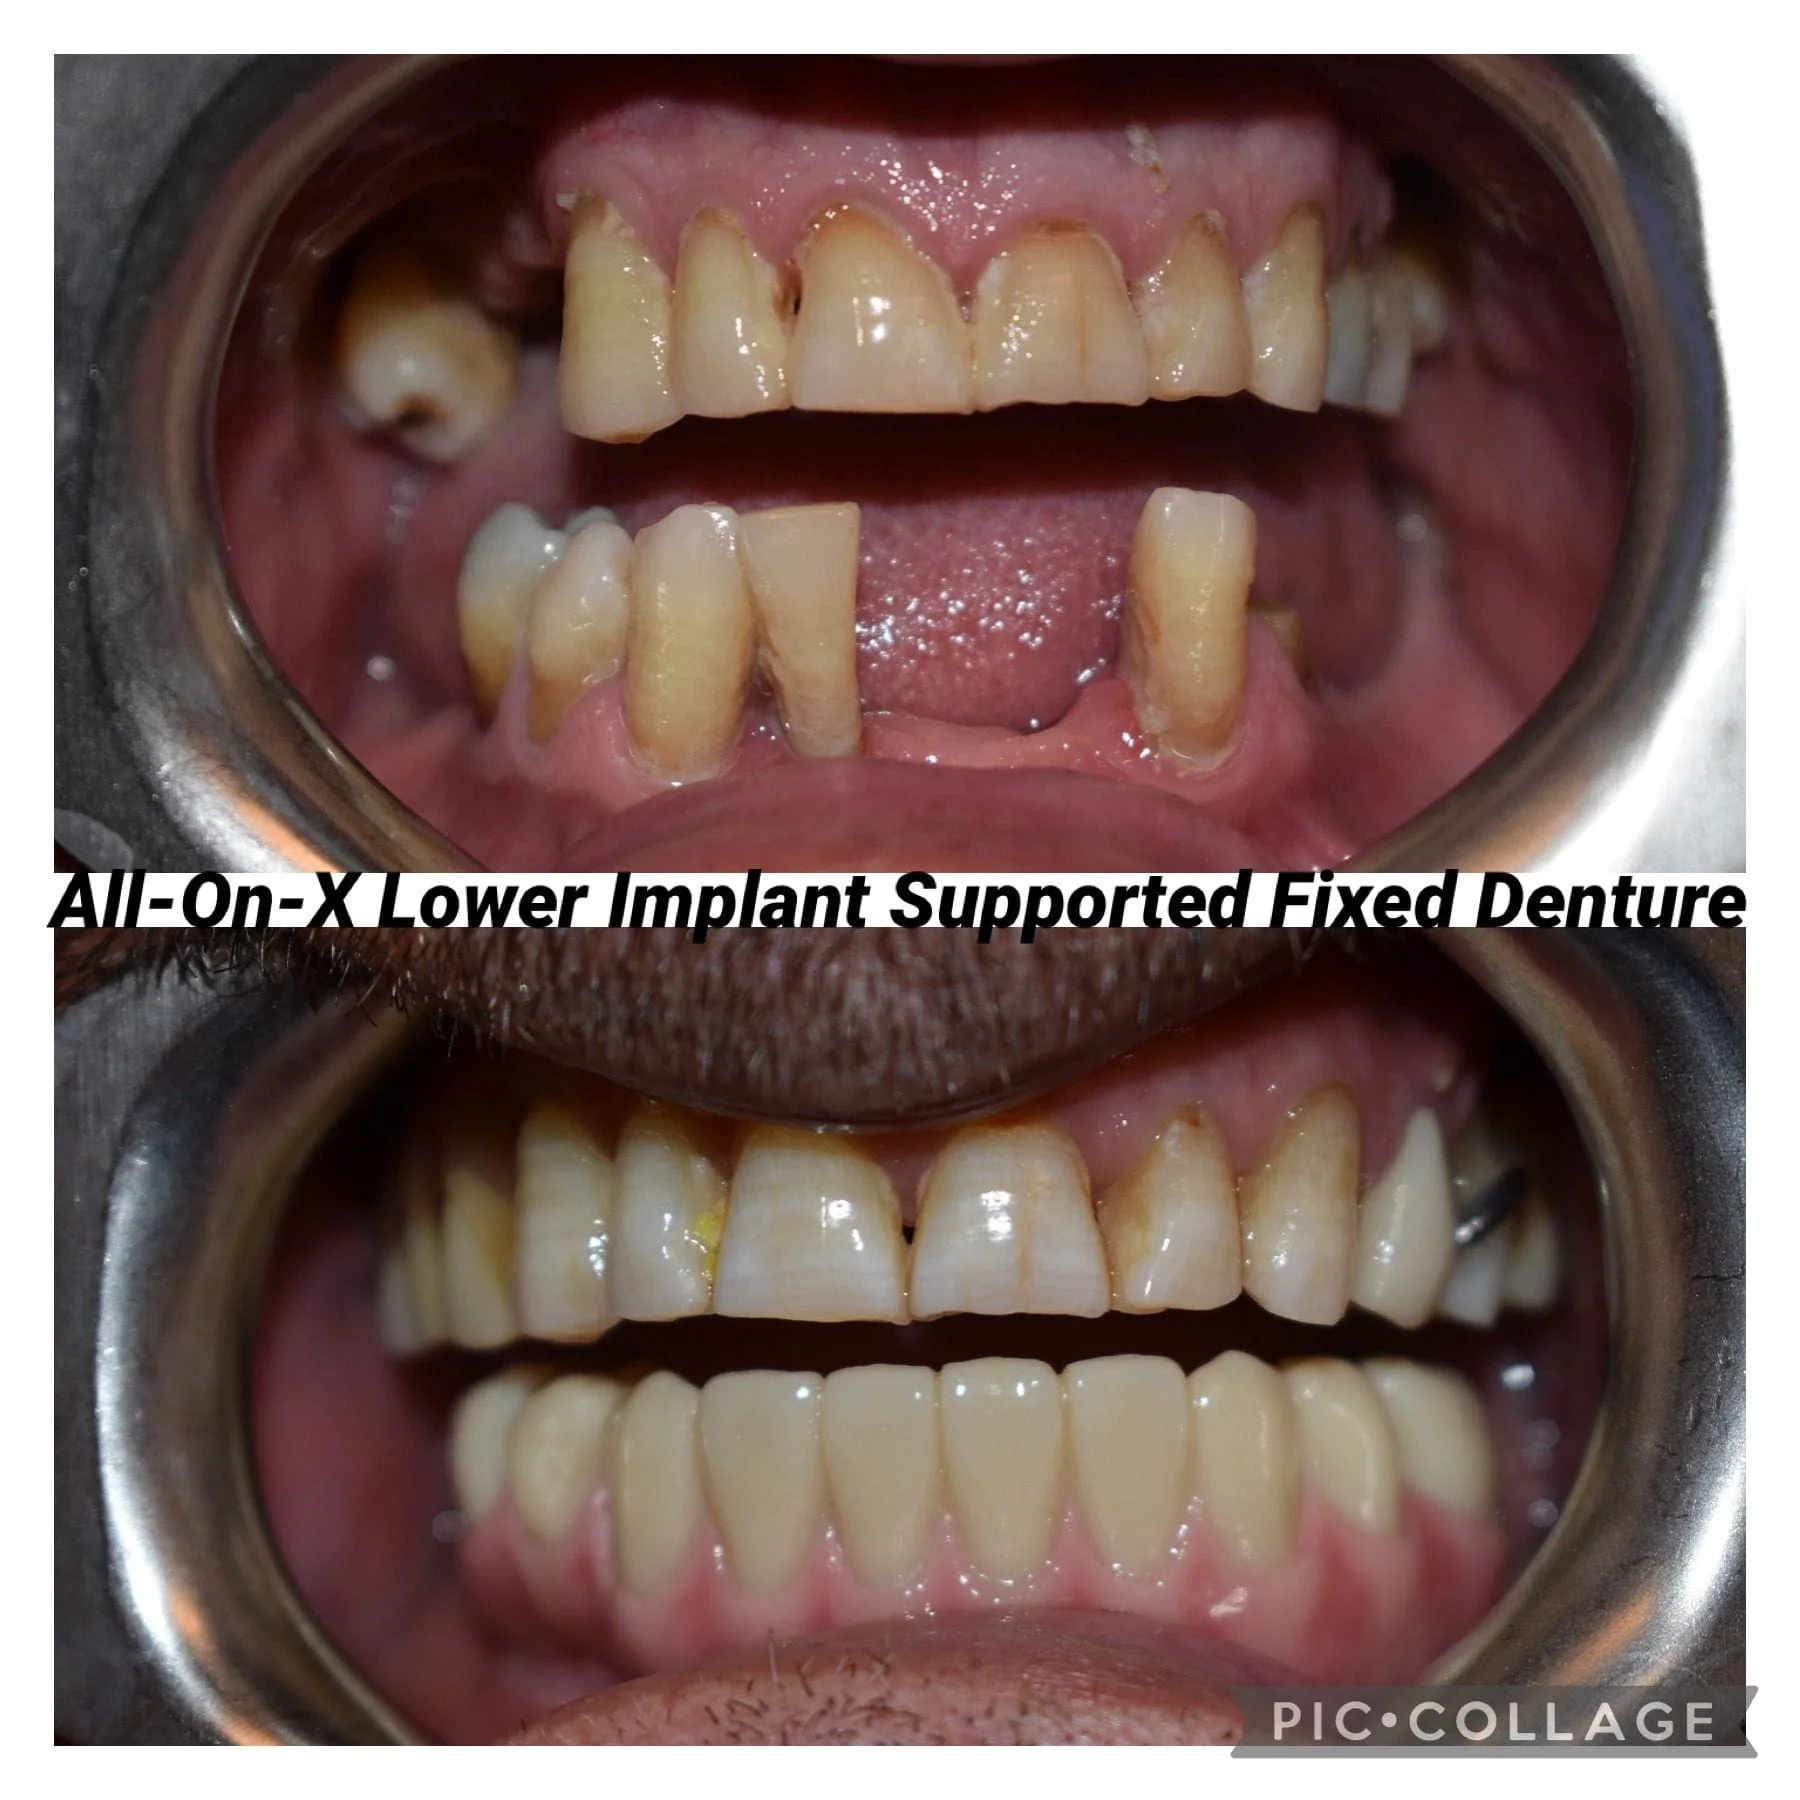 All-On-X Implant supported teeth